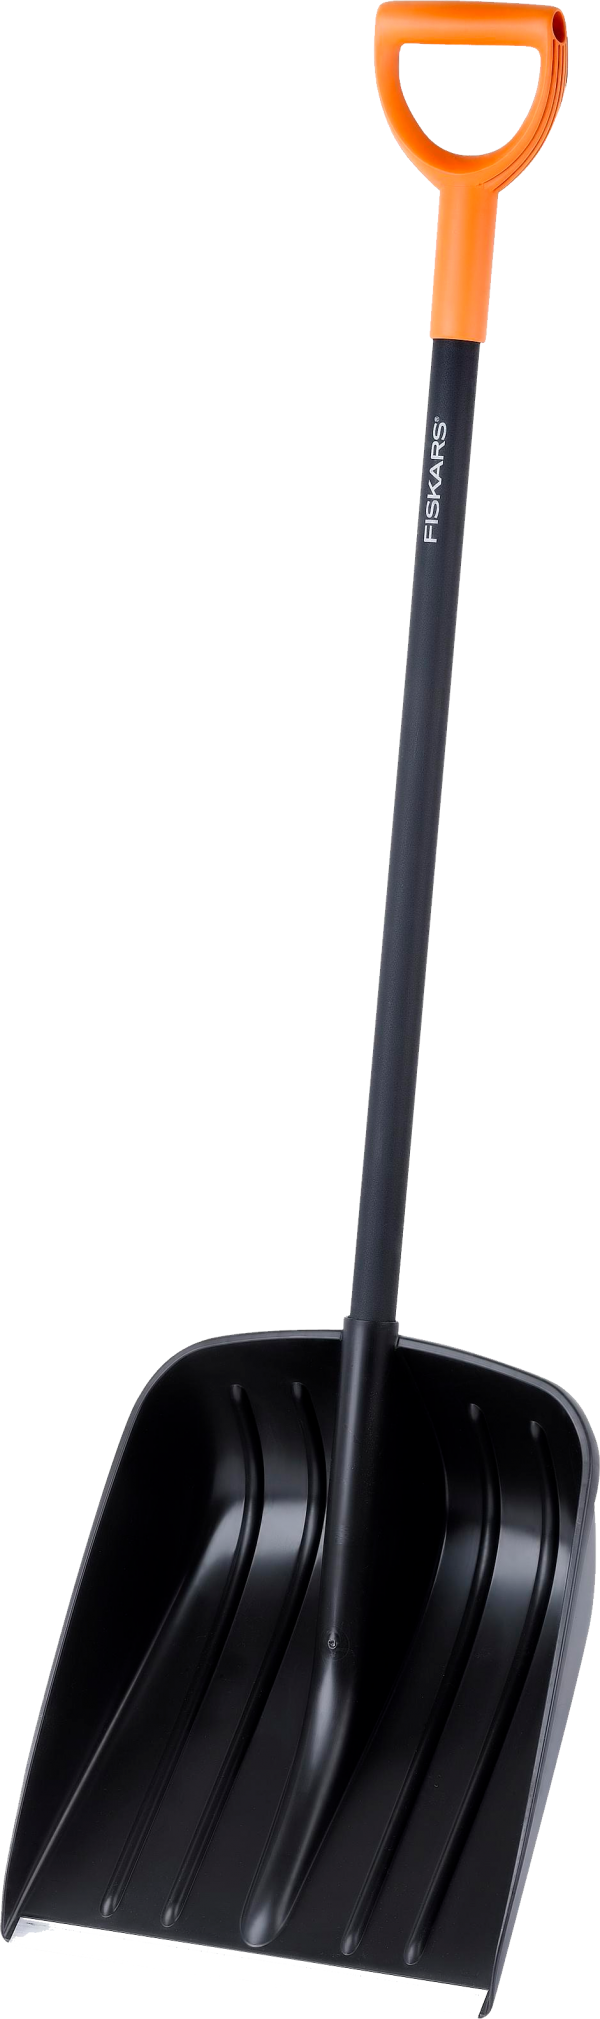 A Black Pole With A White Top